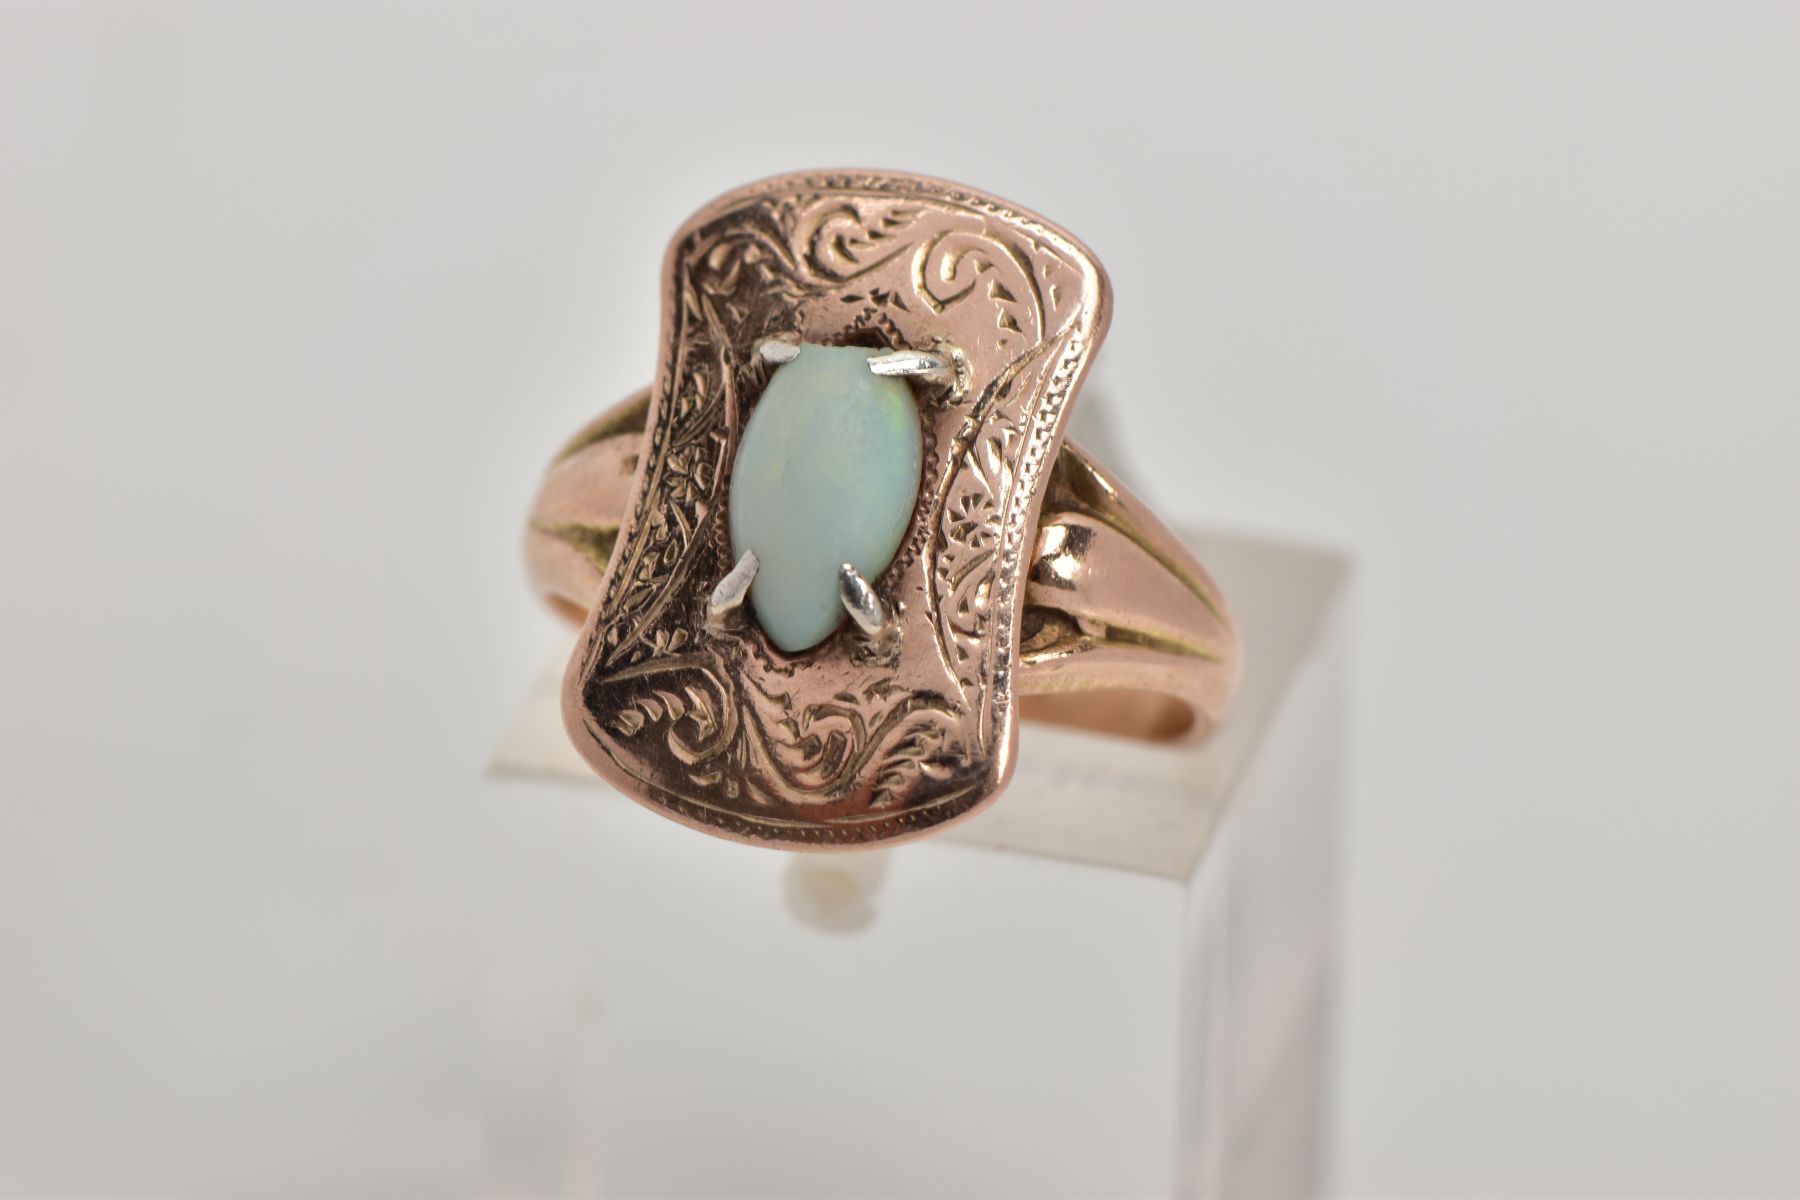 AN EARLY 20TH CENTURY 9CT GOLD OPAL RING, the head of the ring of a rounded rectangular shape with